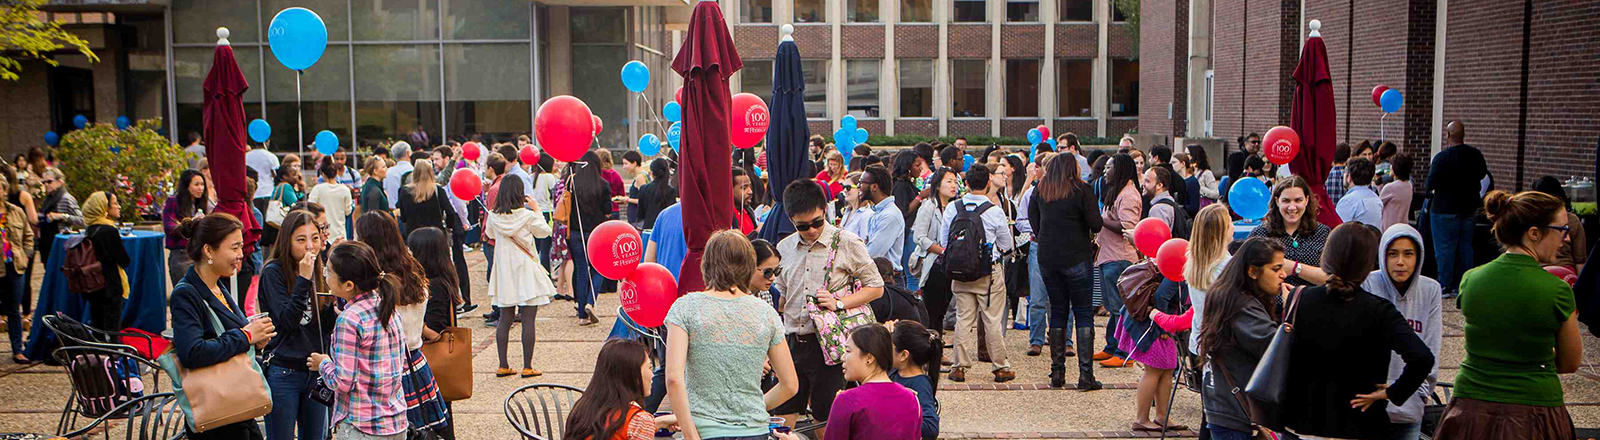 Penn GSE Students, Faculty, and Staff celebrate in the courtyard